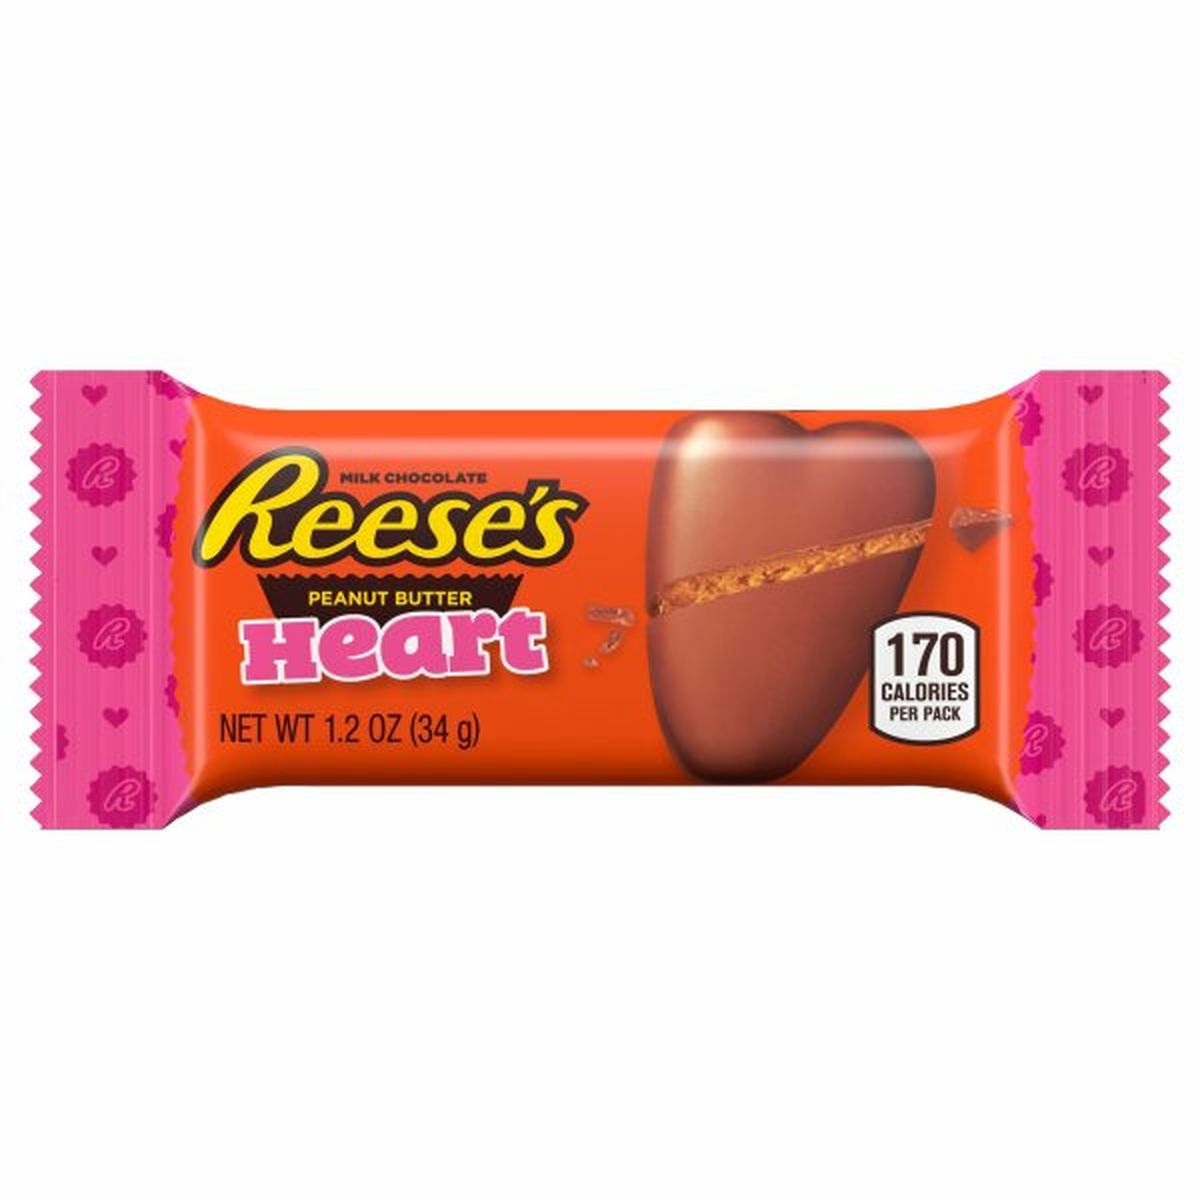 Calories in Reese's Peanut Butter Heart